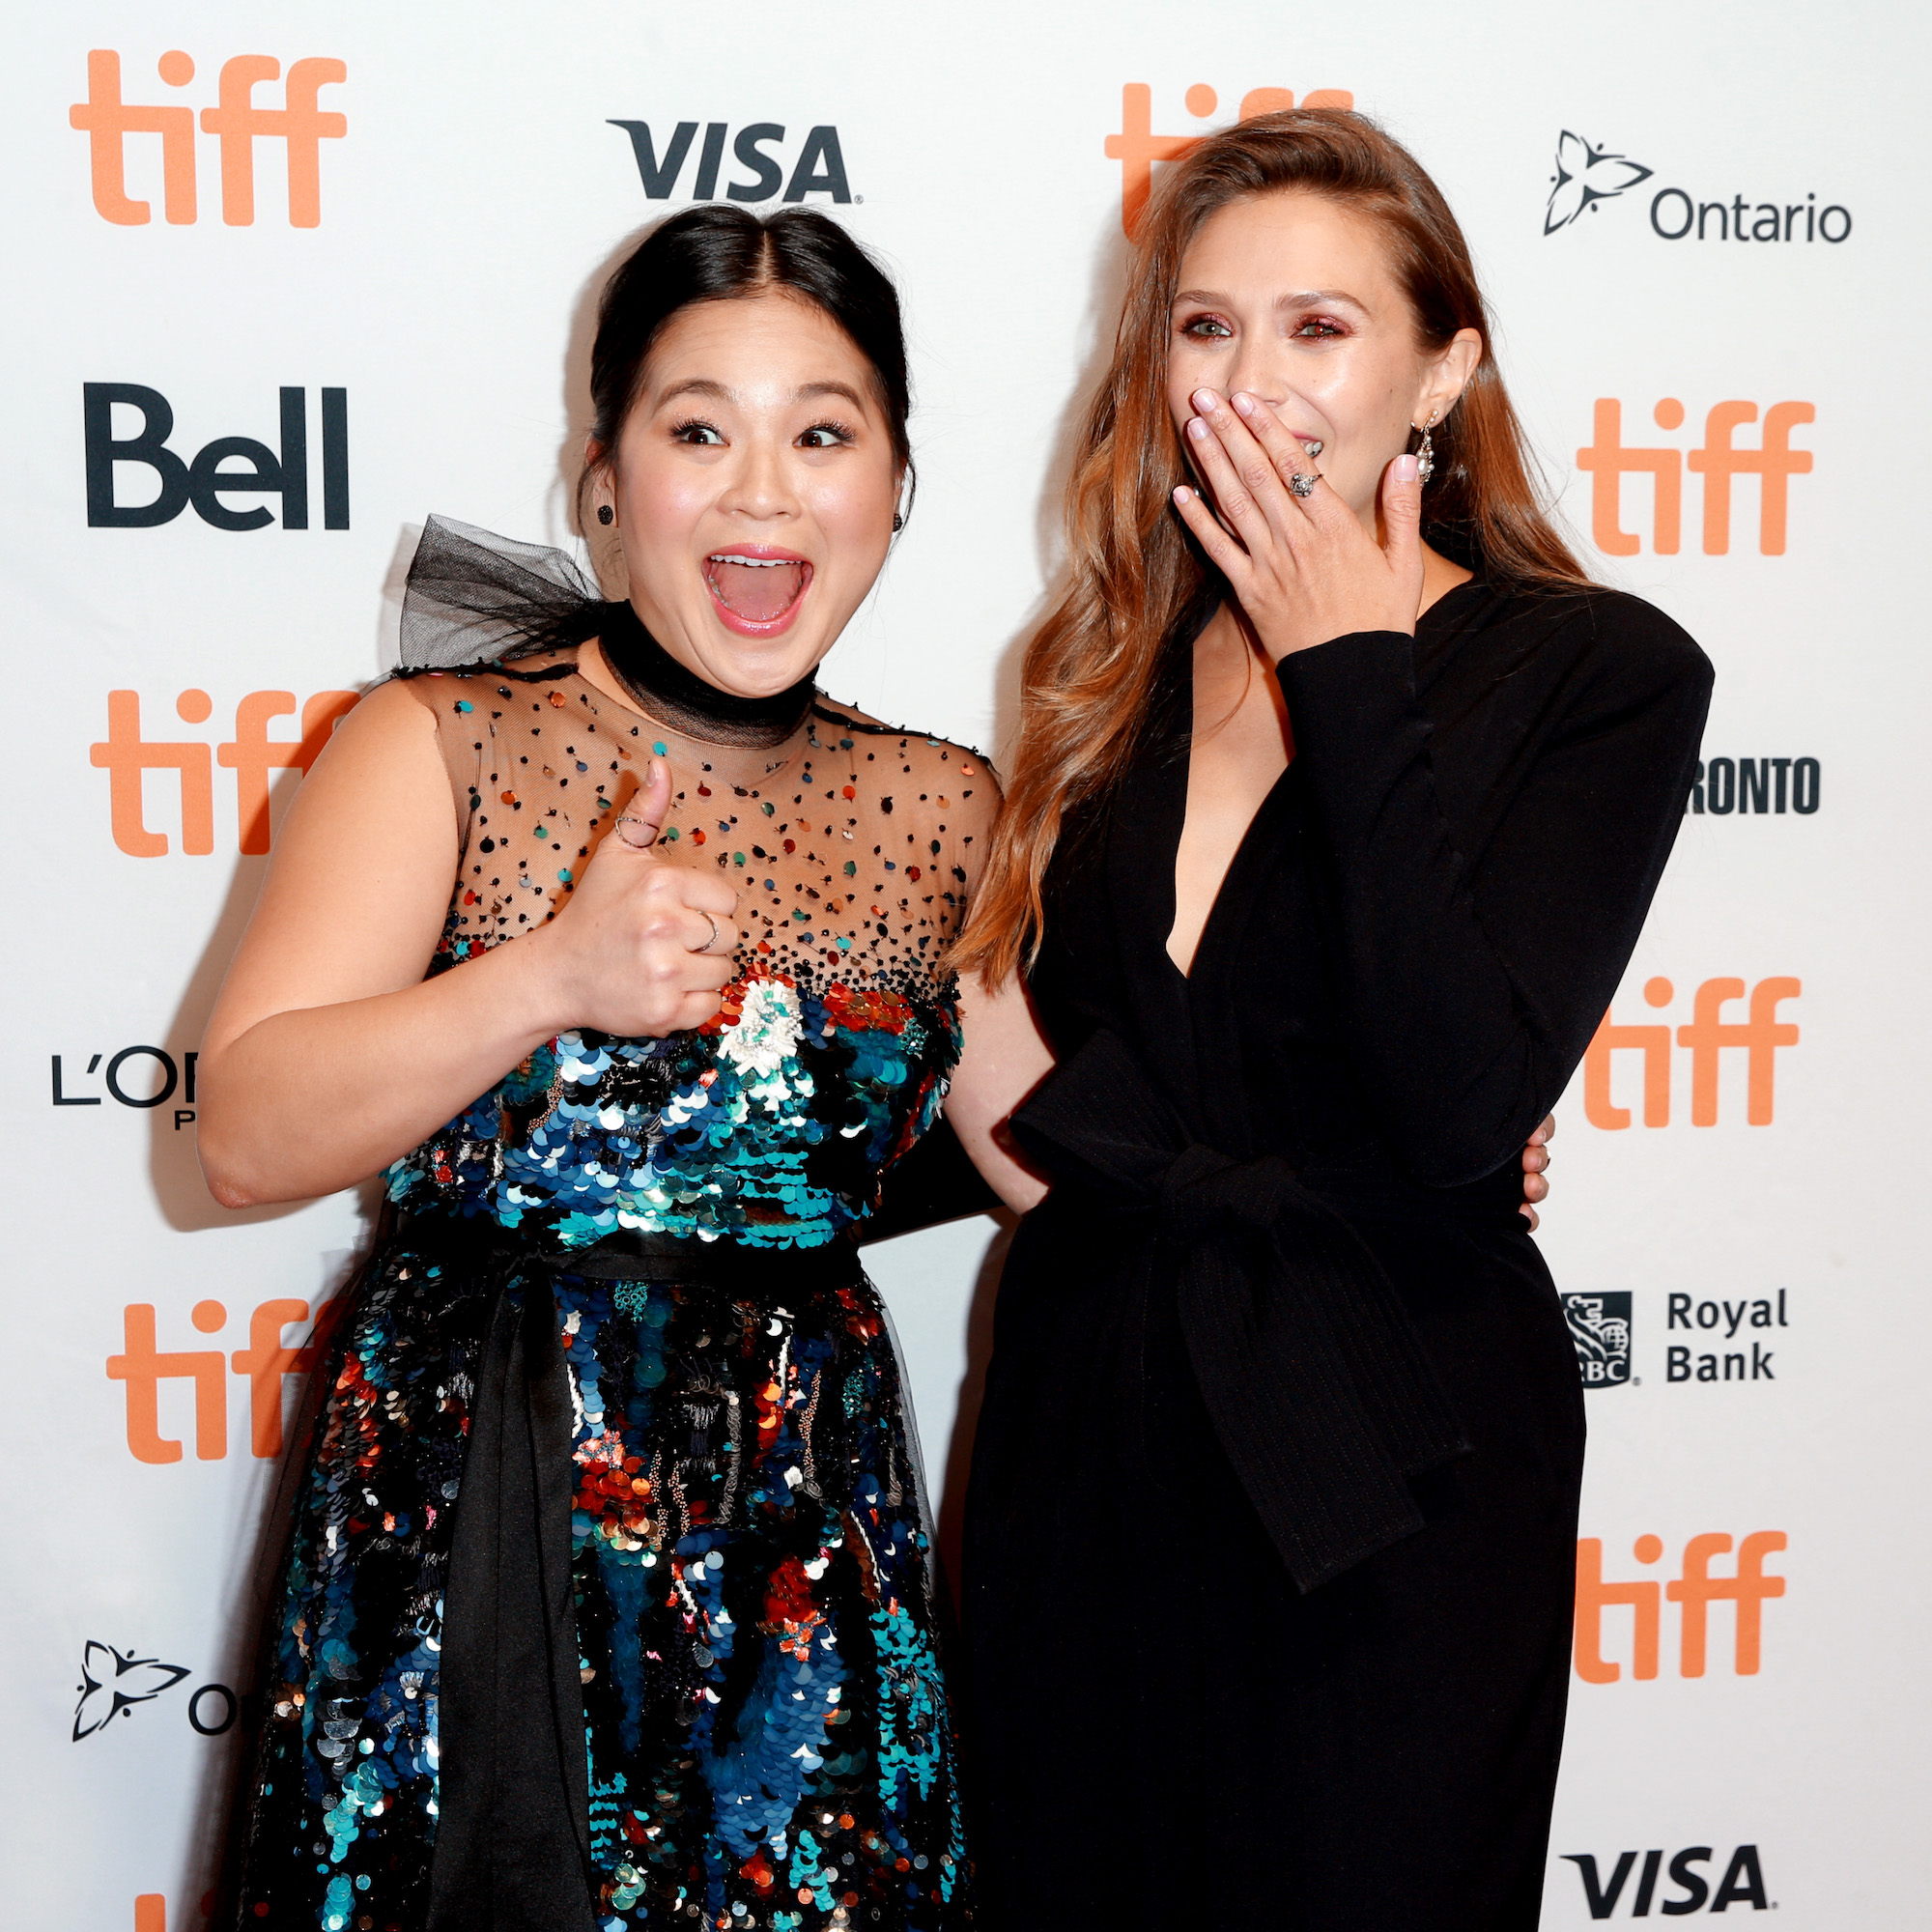 Kelly Marie Tran and Elizabeth Olsen at the 'Sorry For Your Loss' premiere at the 2018 Toronto International Film Festival on Sept. 8, 2018